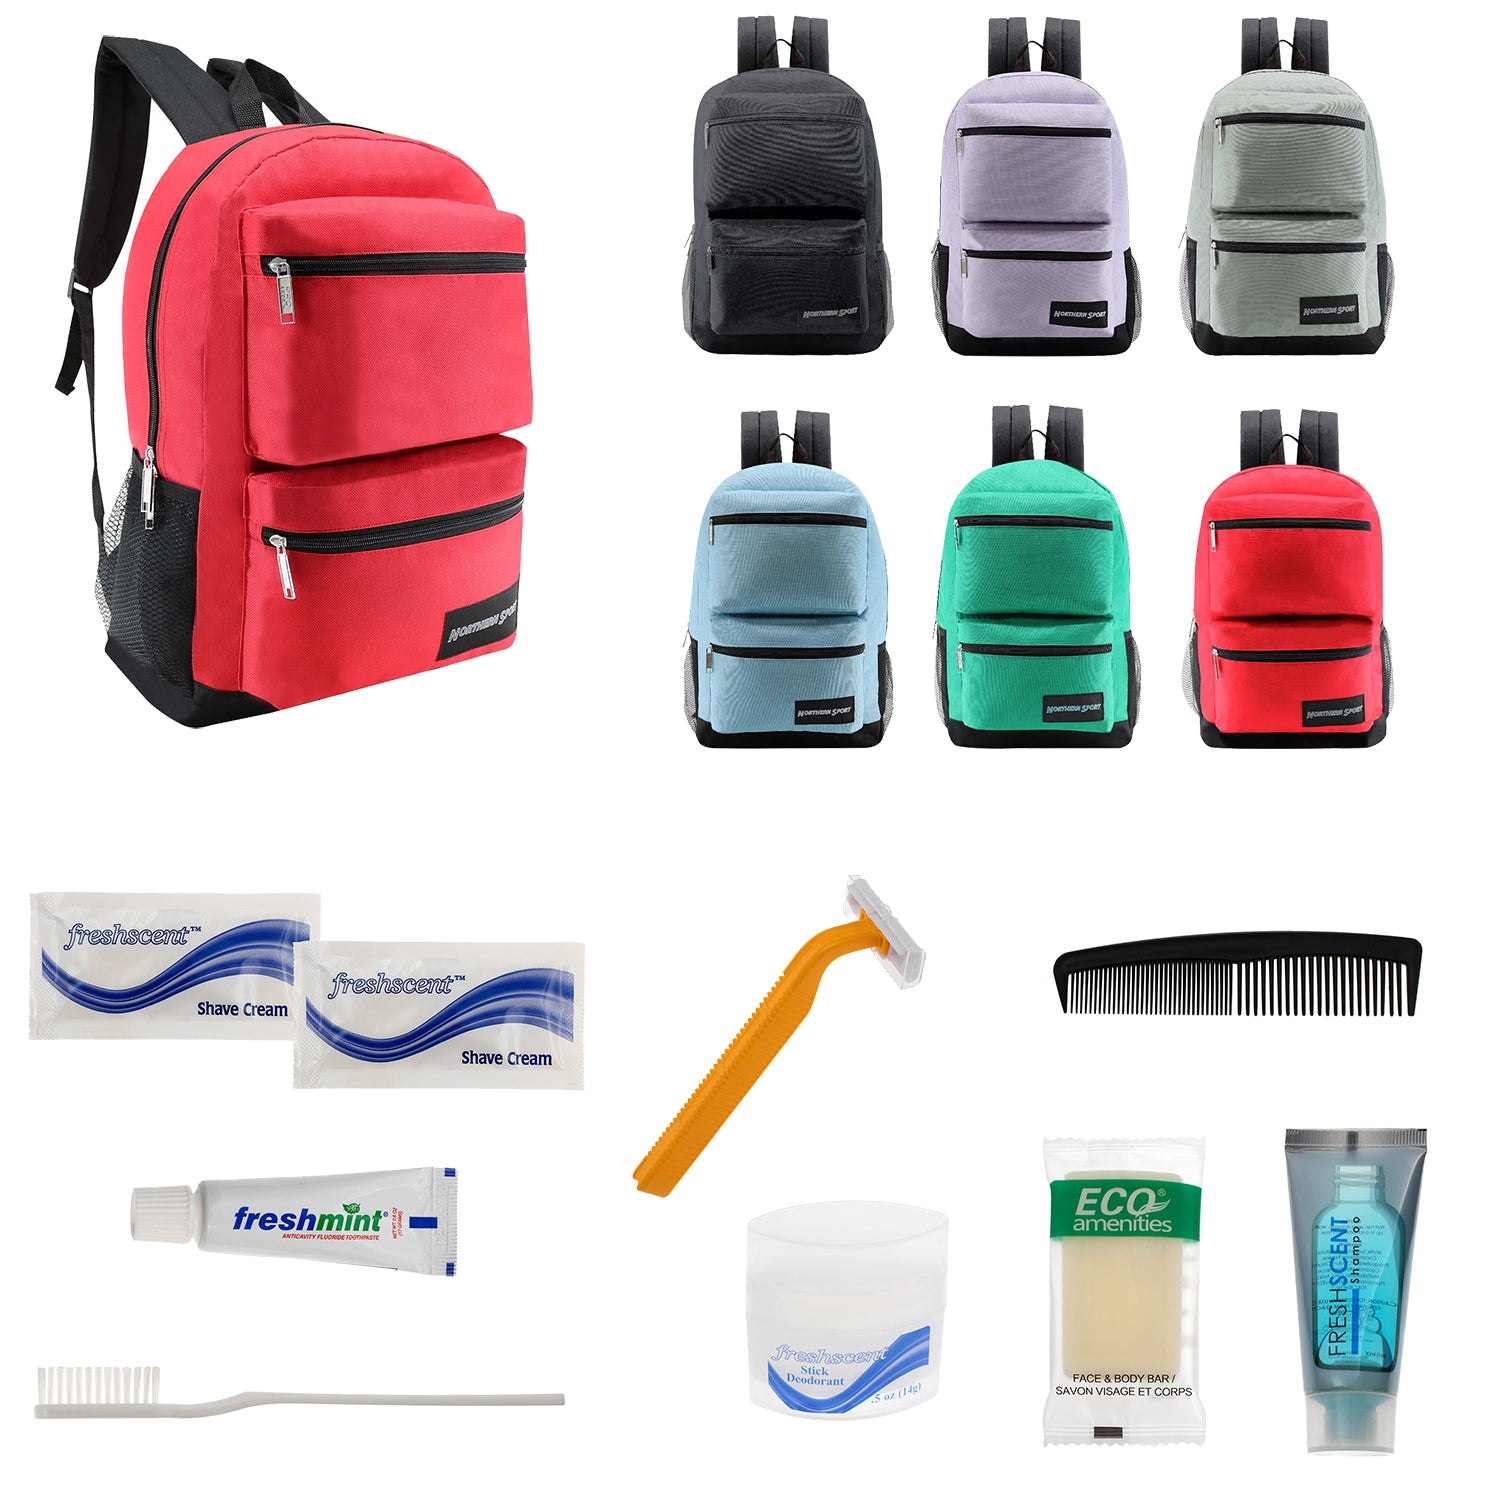 Bulk Case of 12 19" Backpacks and 12 Hygiene / Toiletries Kit - Wholesale Care Package - Disaster Relief Kit, Homeless, Charity